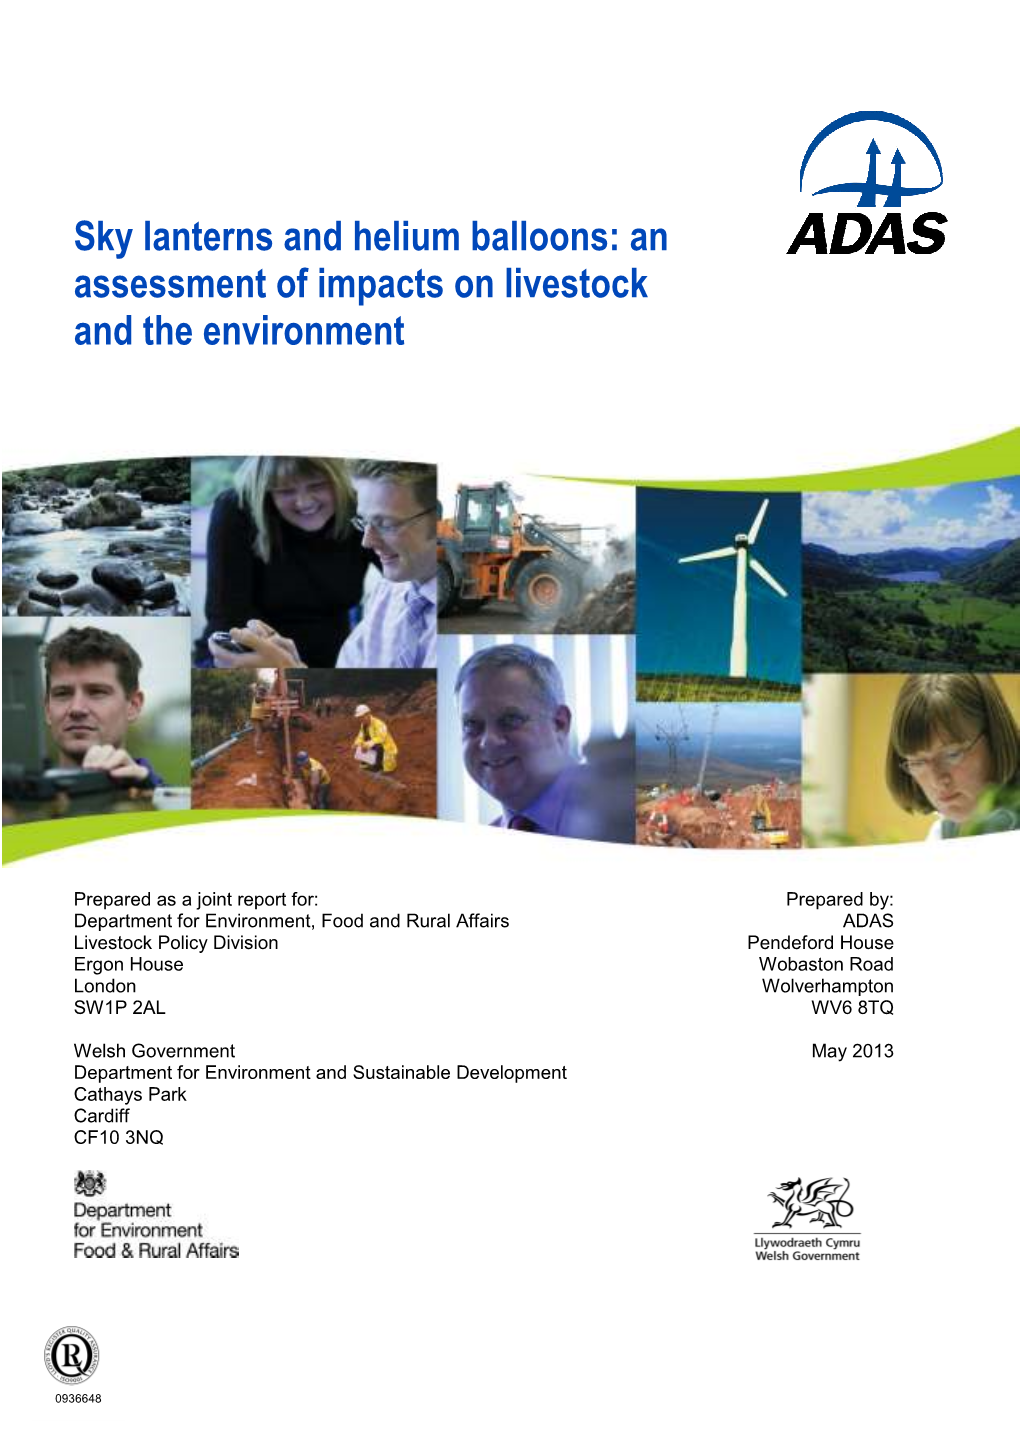 Sky Lanterns and Helium Balloons: an Assessment of Impacts on Livestock and the Environment